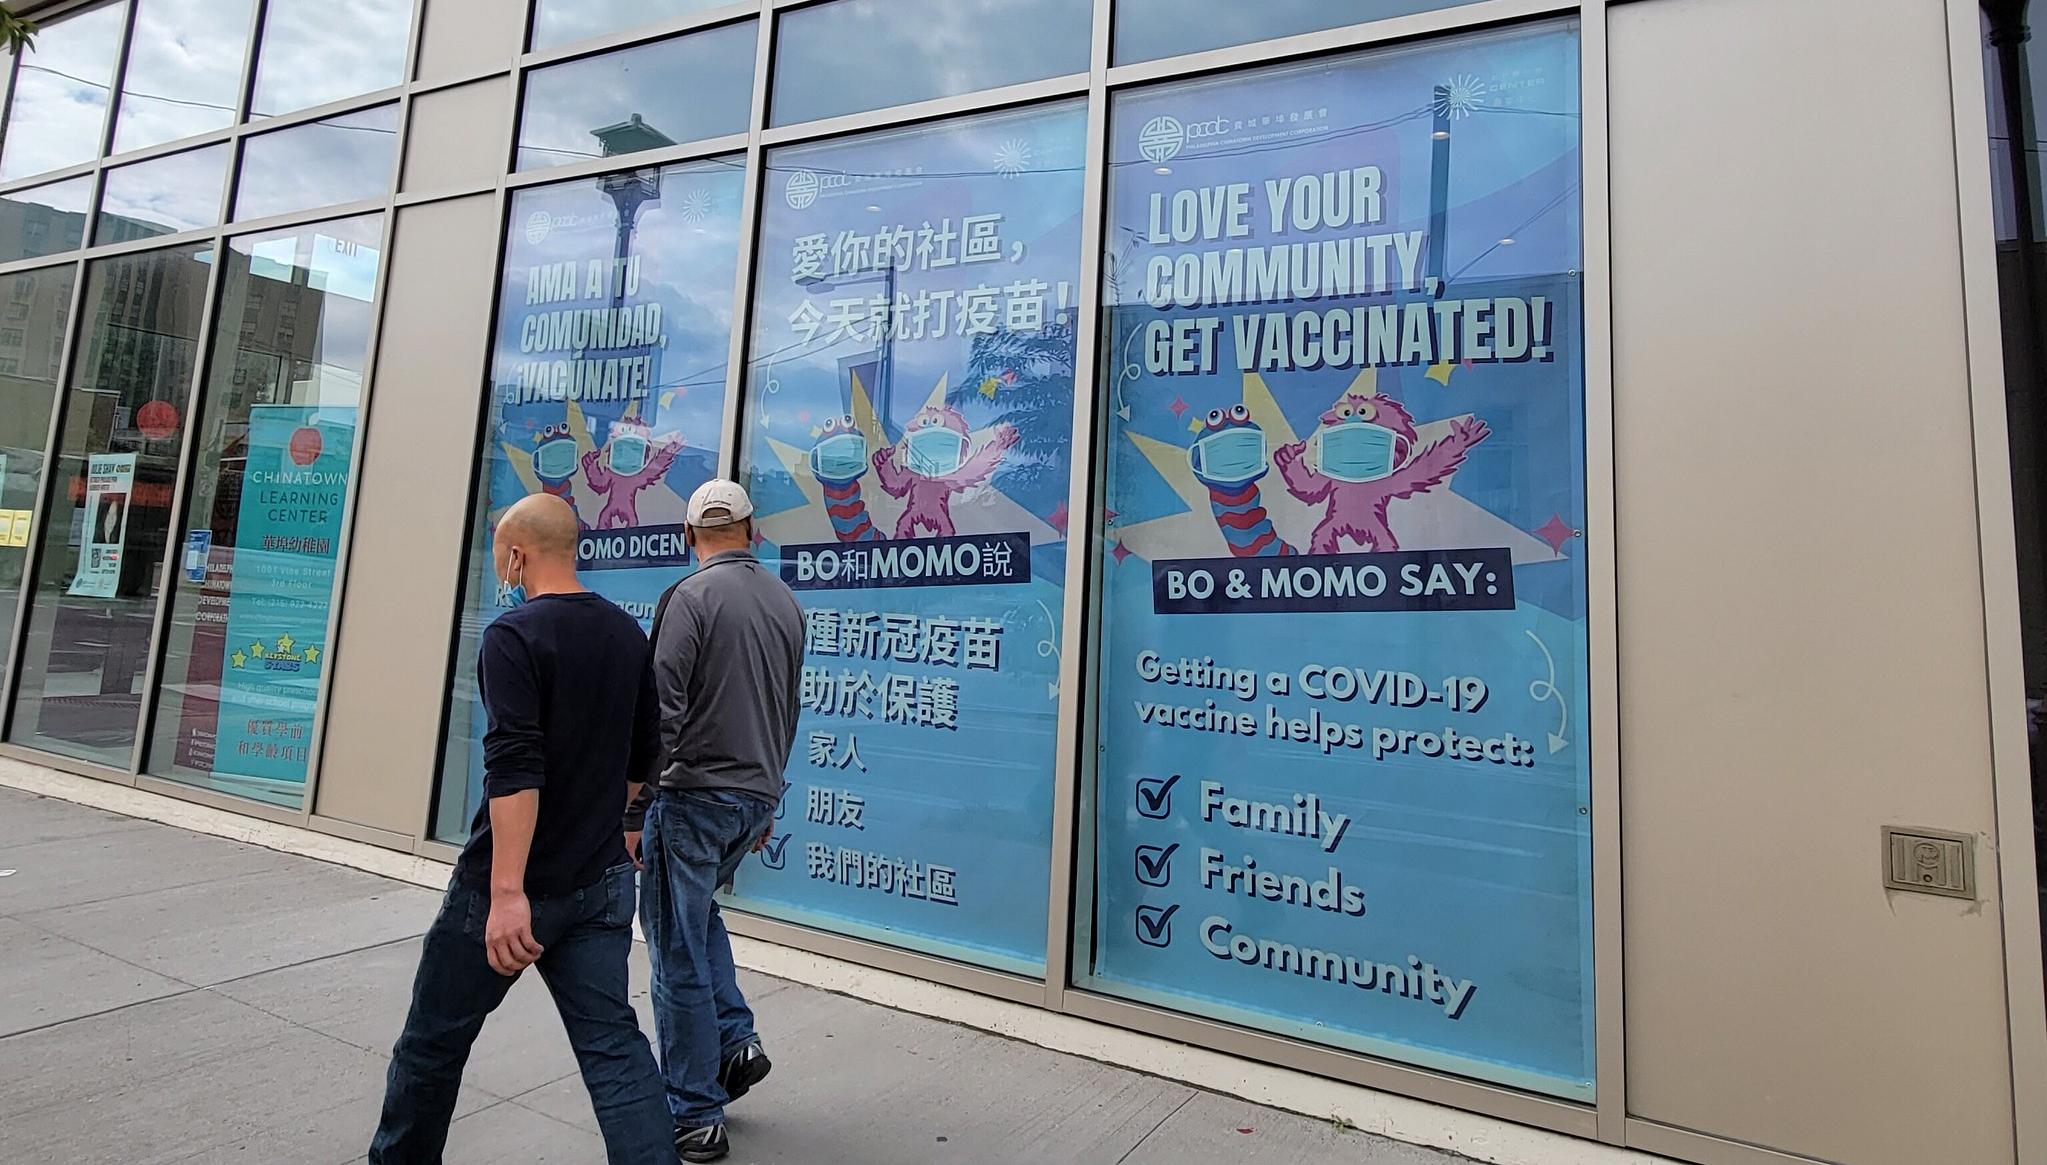 Two men walk past windows that display signs that say "love your community, get vaccinated!"